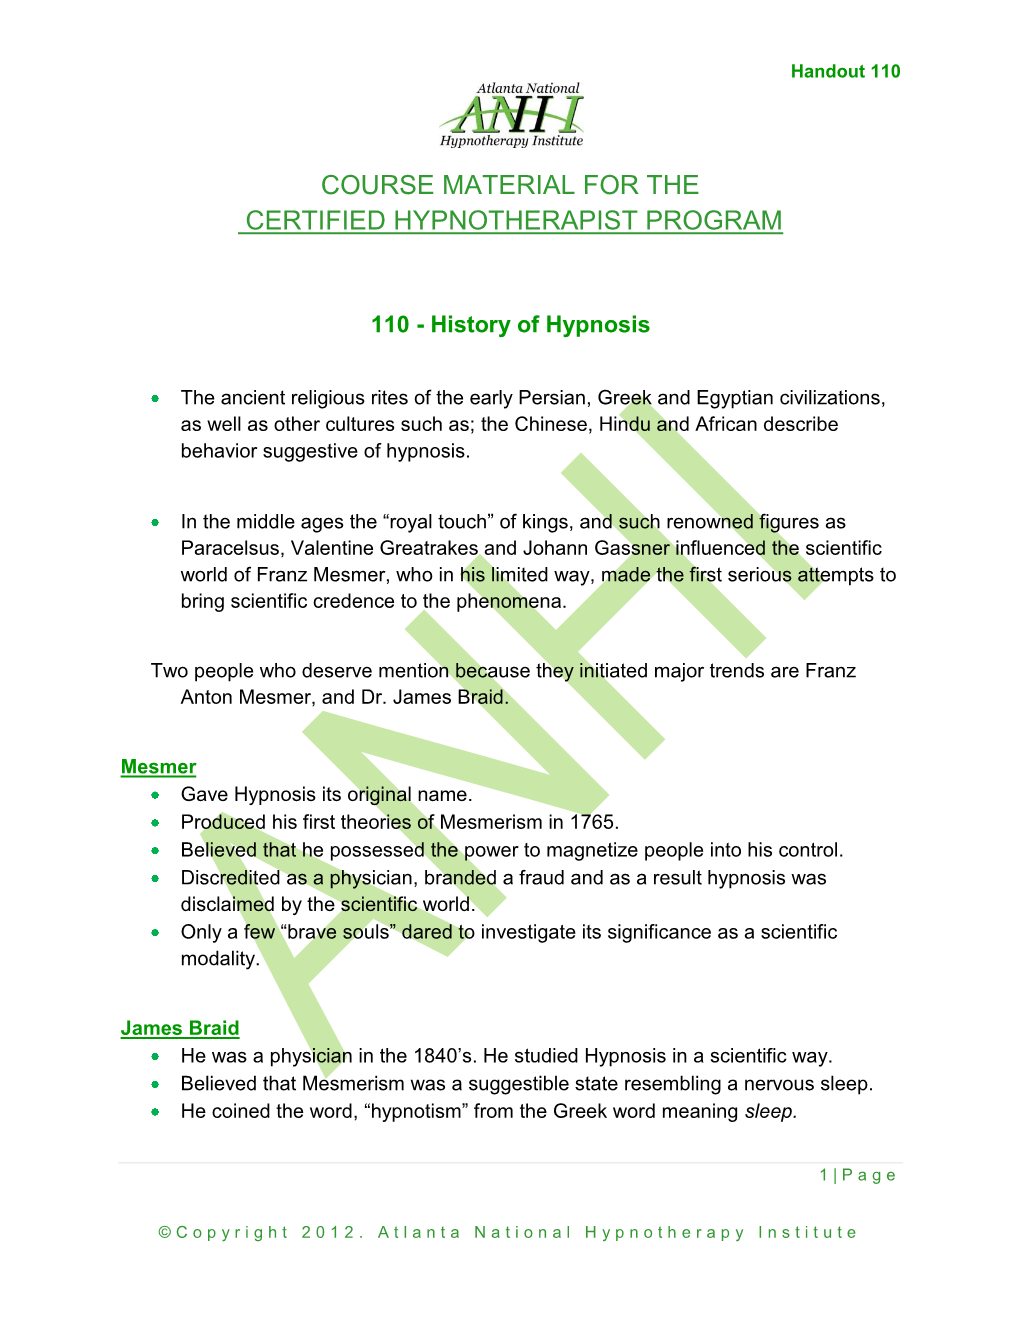 Course Material for the Certified Hypnotherapist Program